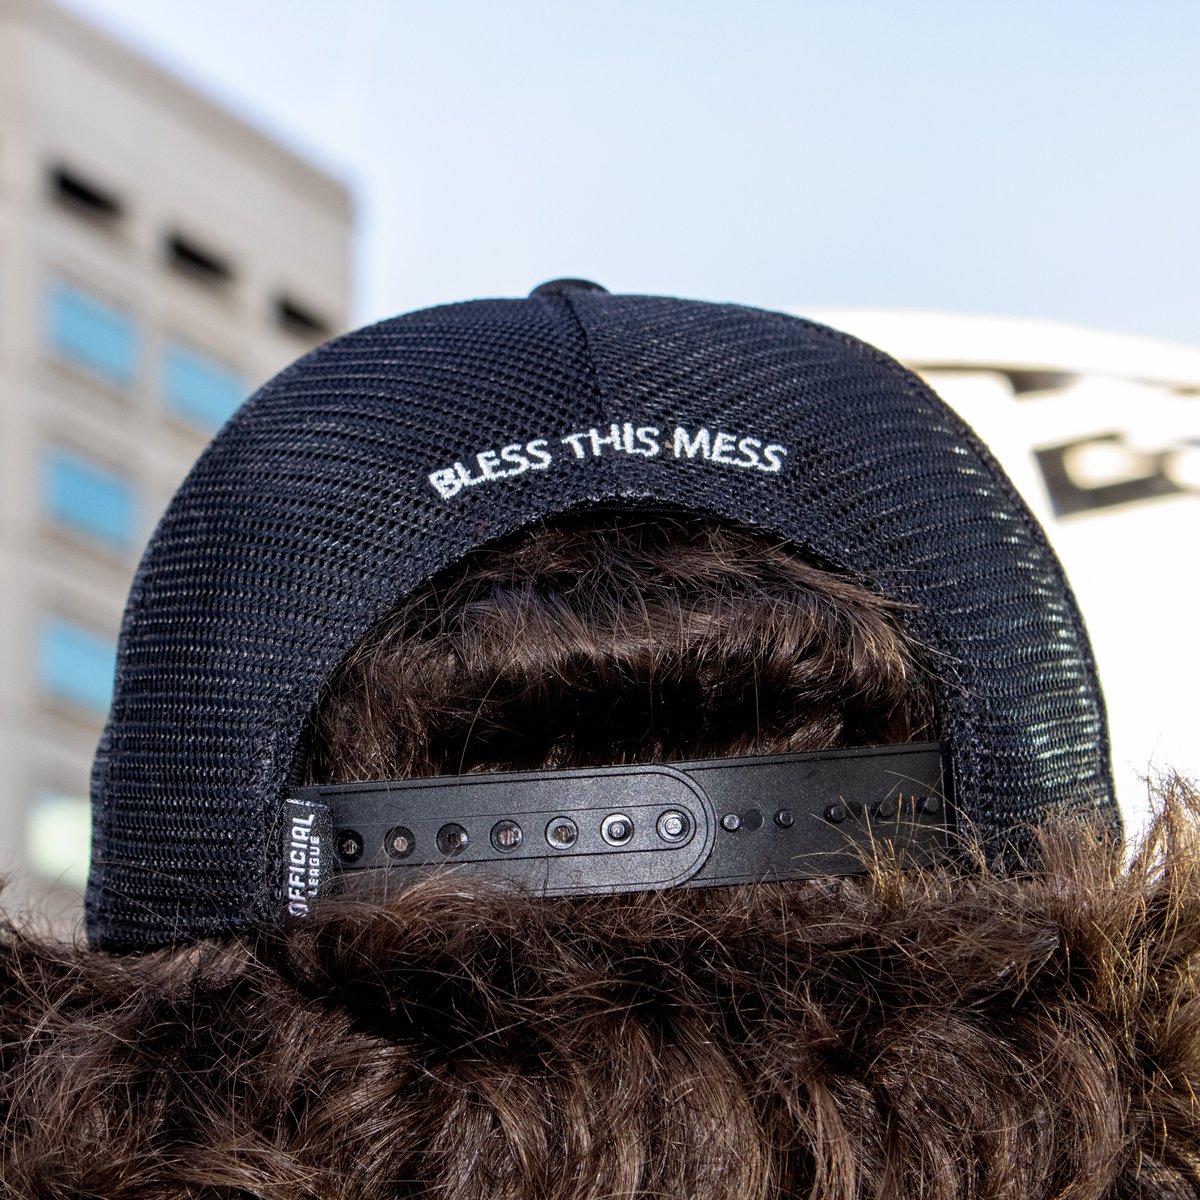 inspired by u.s.girls most recent studio album, “bless this mess,” this all mesh cap is a tribute to the band’s soulful vibes. this black beauty is not just a hat, but a piece of art that screams style, substance, and a dash of rebellious spirit.